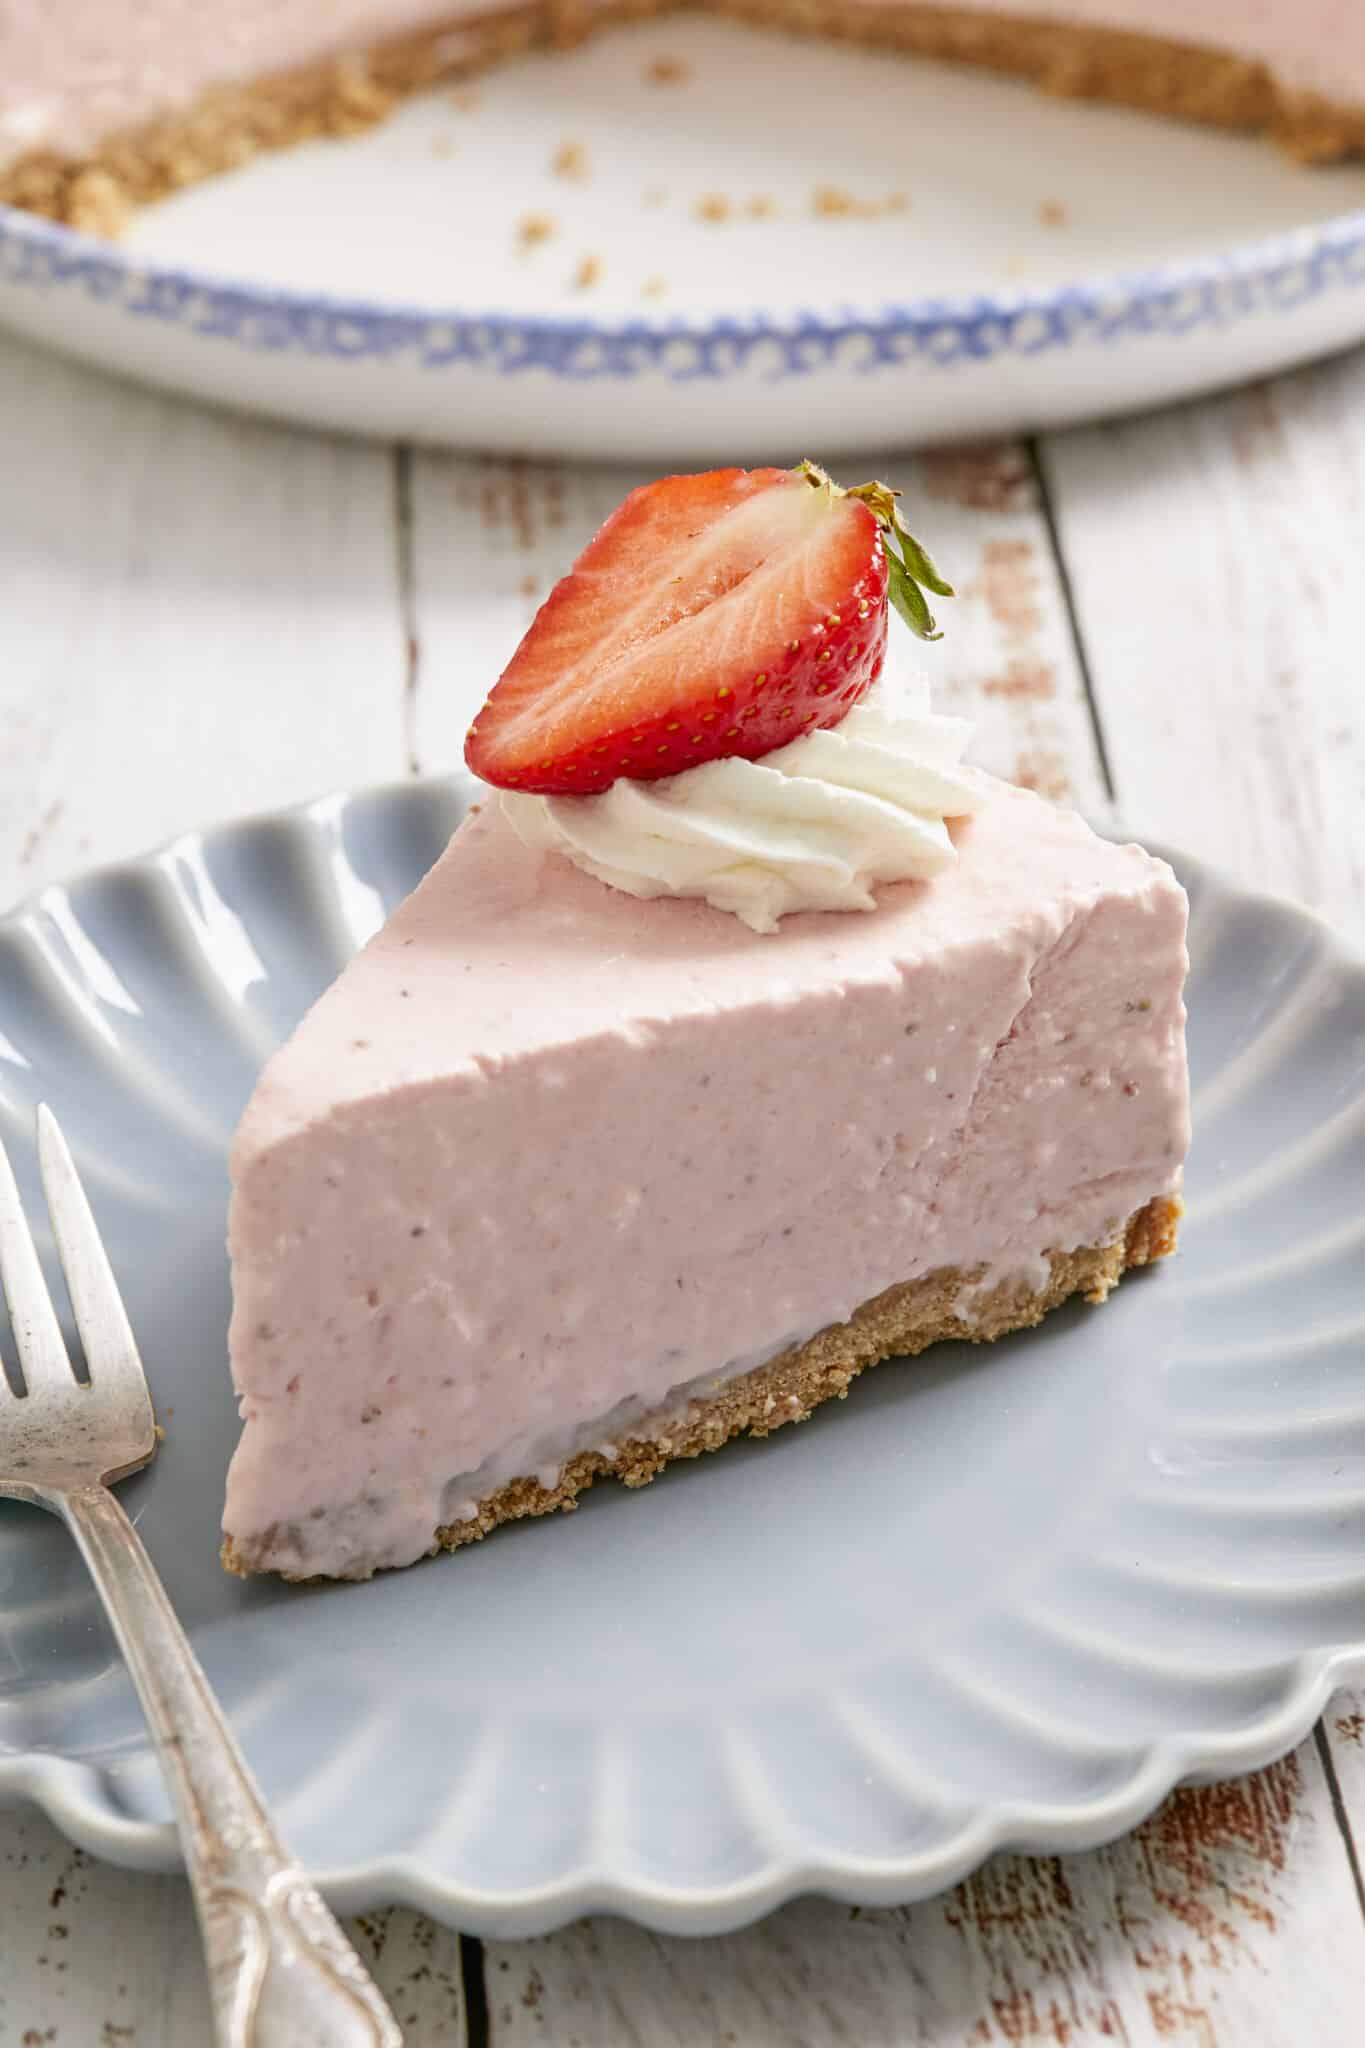 A close shot at a slice of No-Bake Strawberry Cheesecake with cookies crust at the bottom, creamy filling on top, decorated with a whipped cream rosette and half fresh strawberry. 